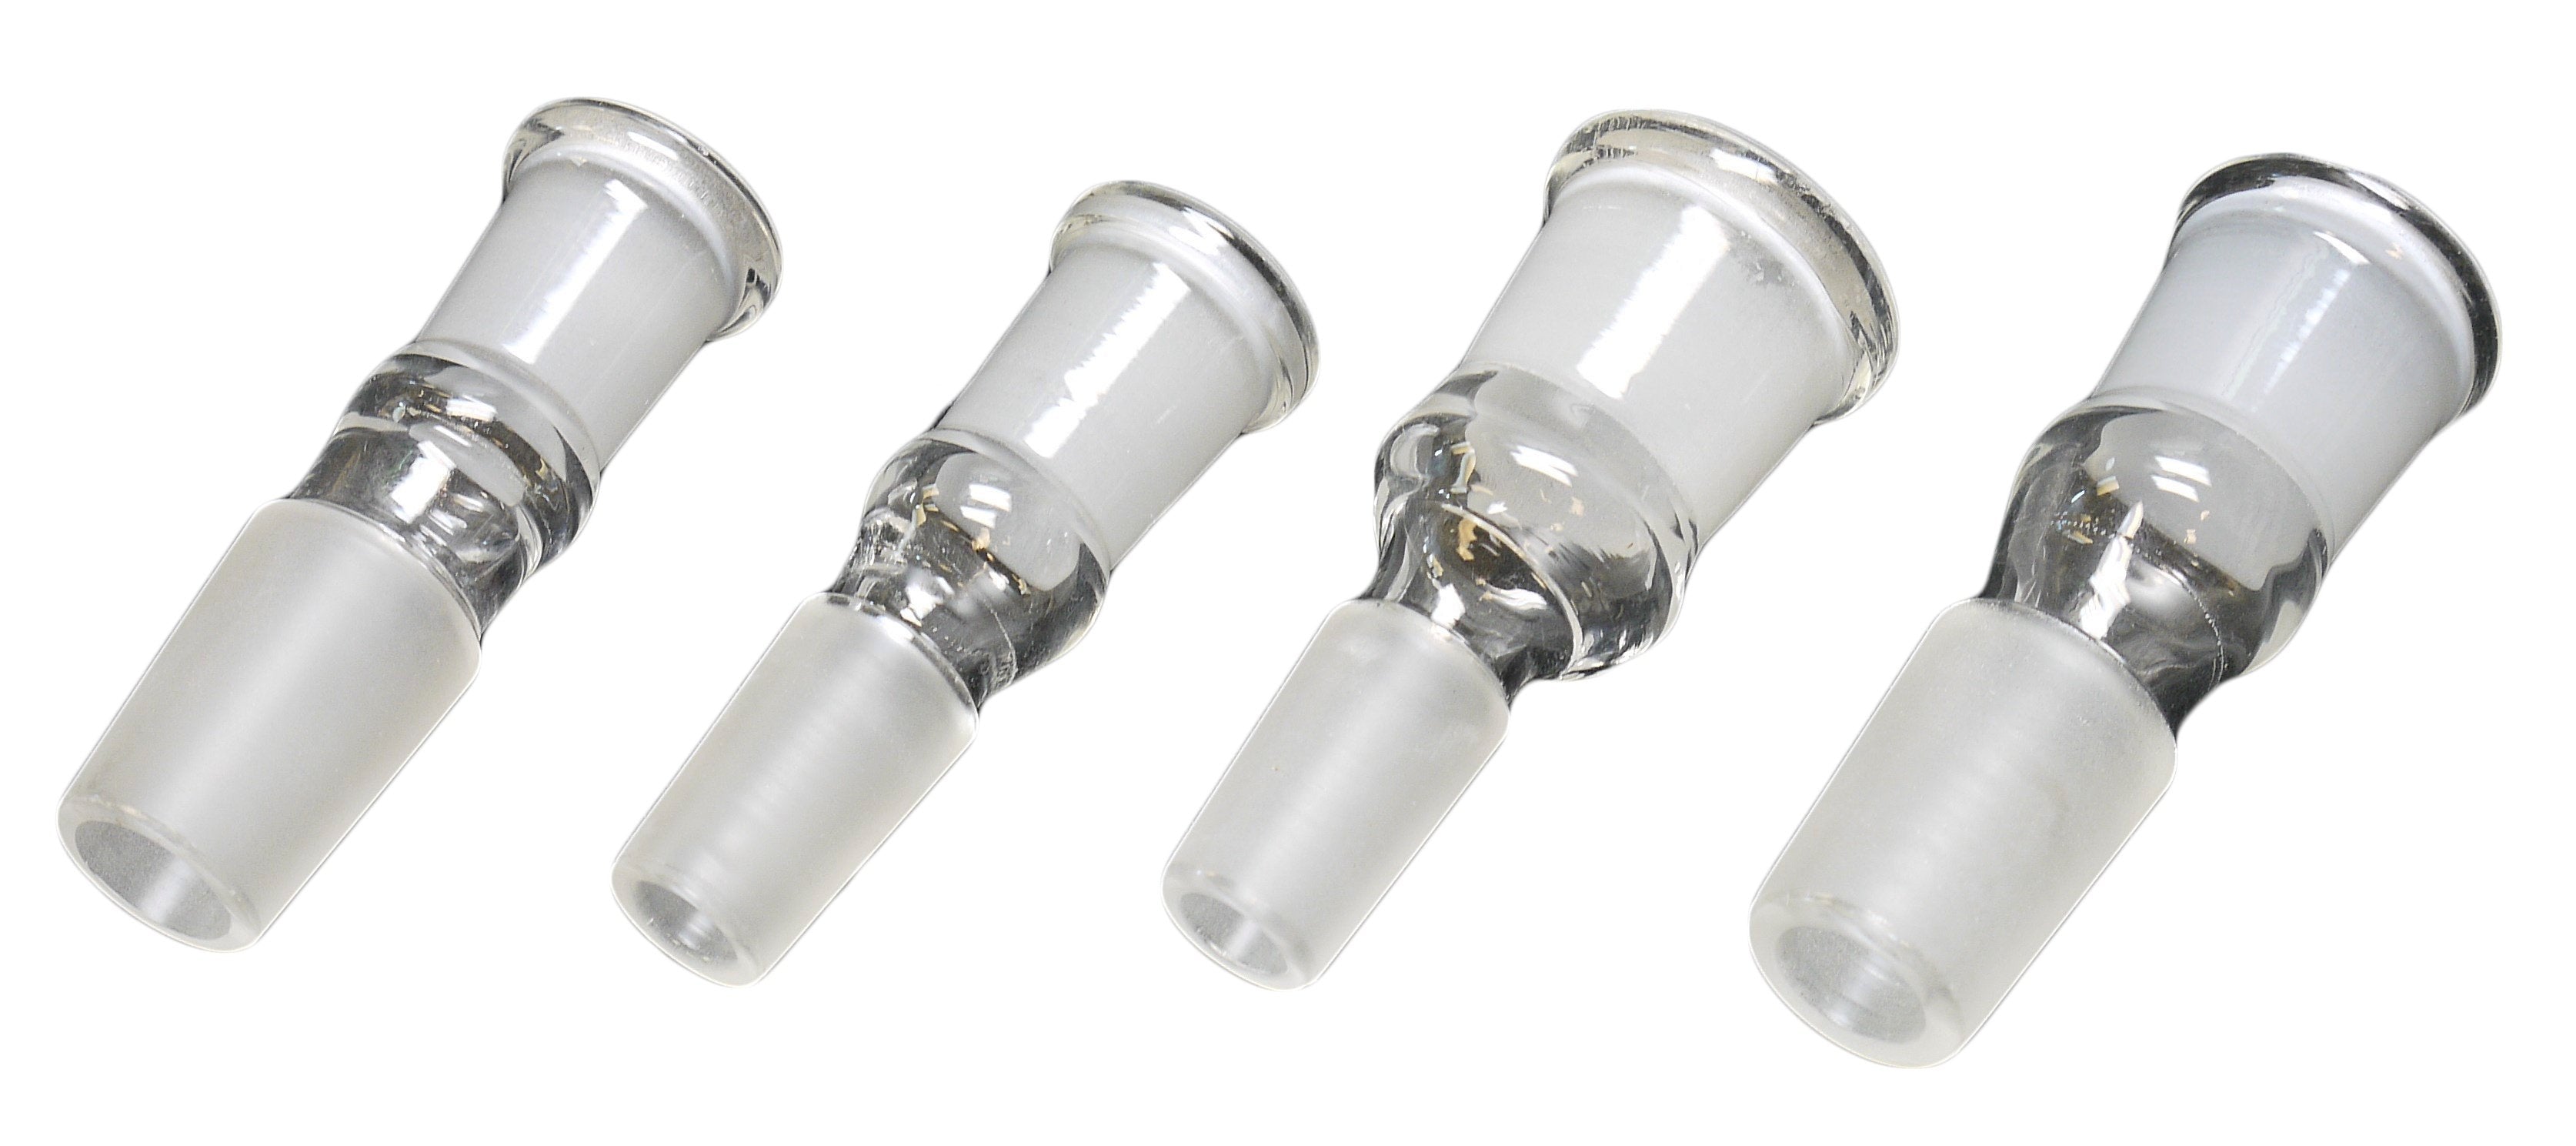 Male to Female connector 14mm to 19mm